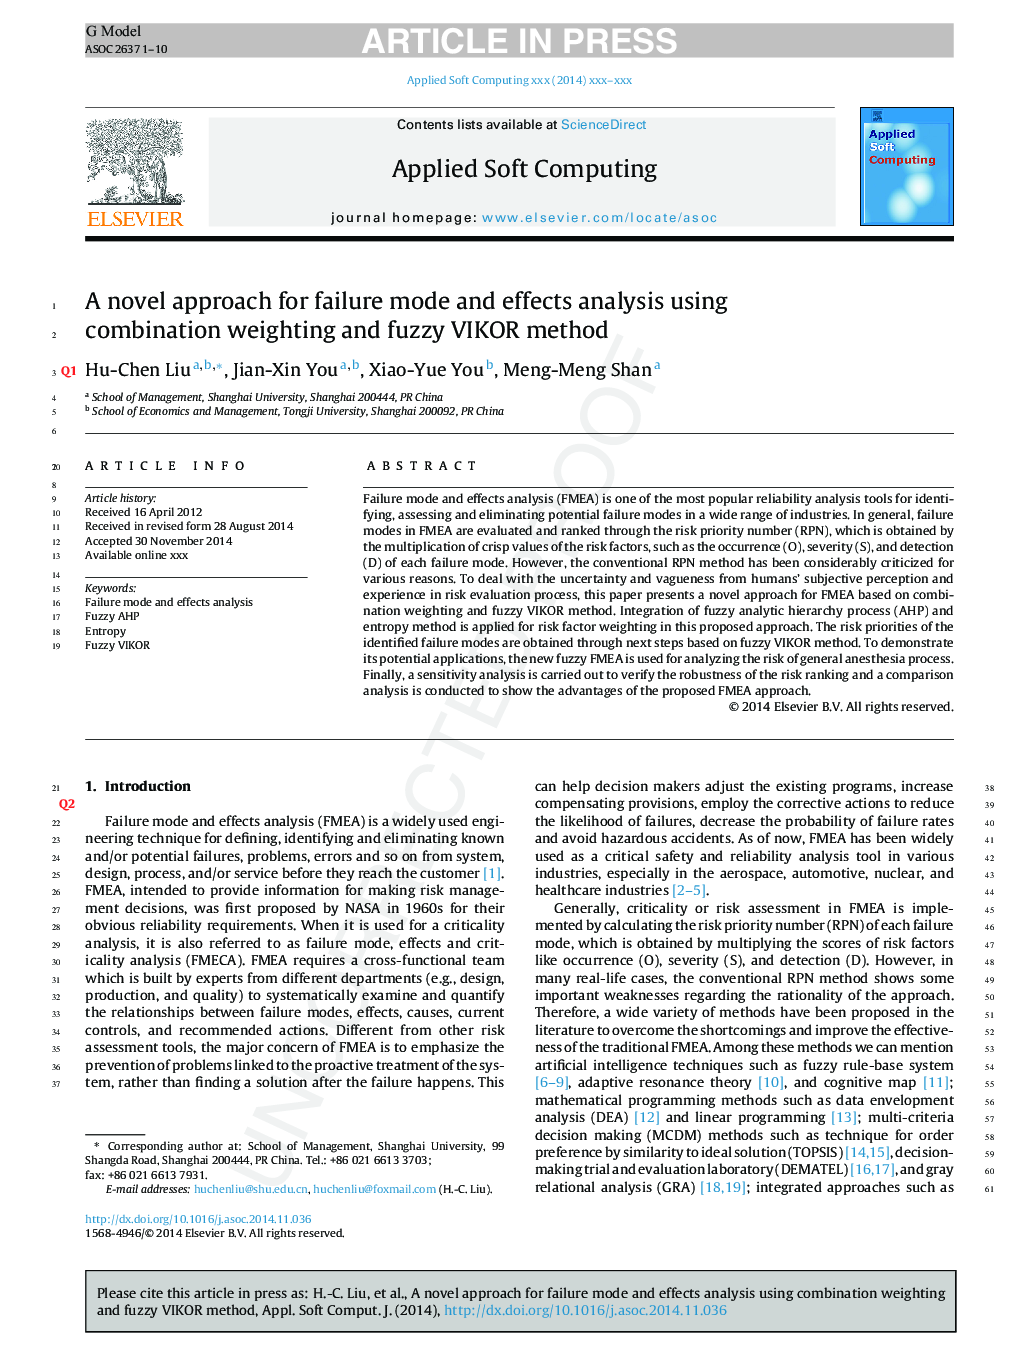 A novel approach for failure mode and effects analysis using combination weighting and fuzzy VIKOR method